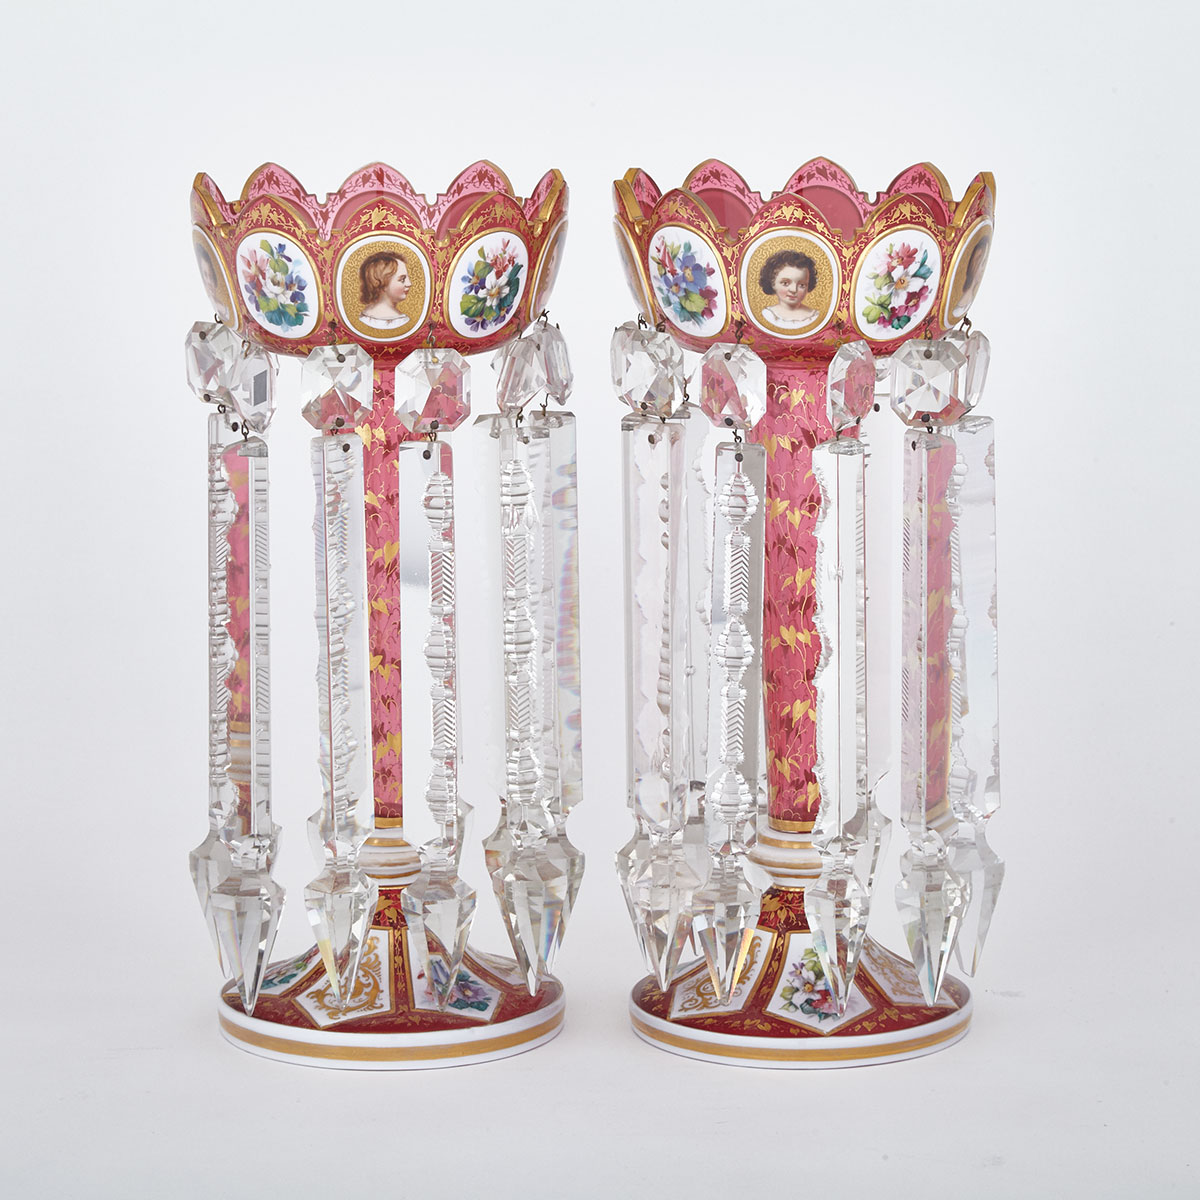 Pair of Bohemian Overlaid and Enameled Red Glass Lustres, late 19th century